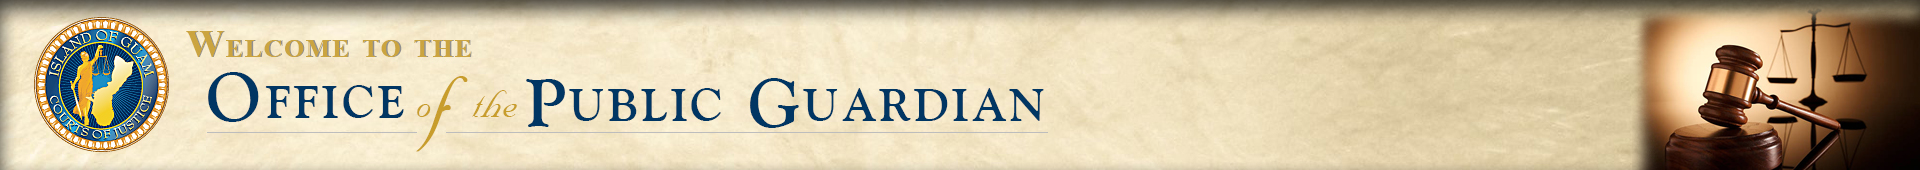 Office of the Public Guardian Header